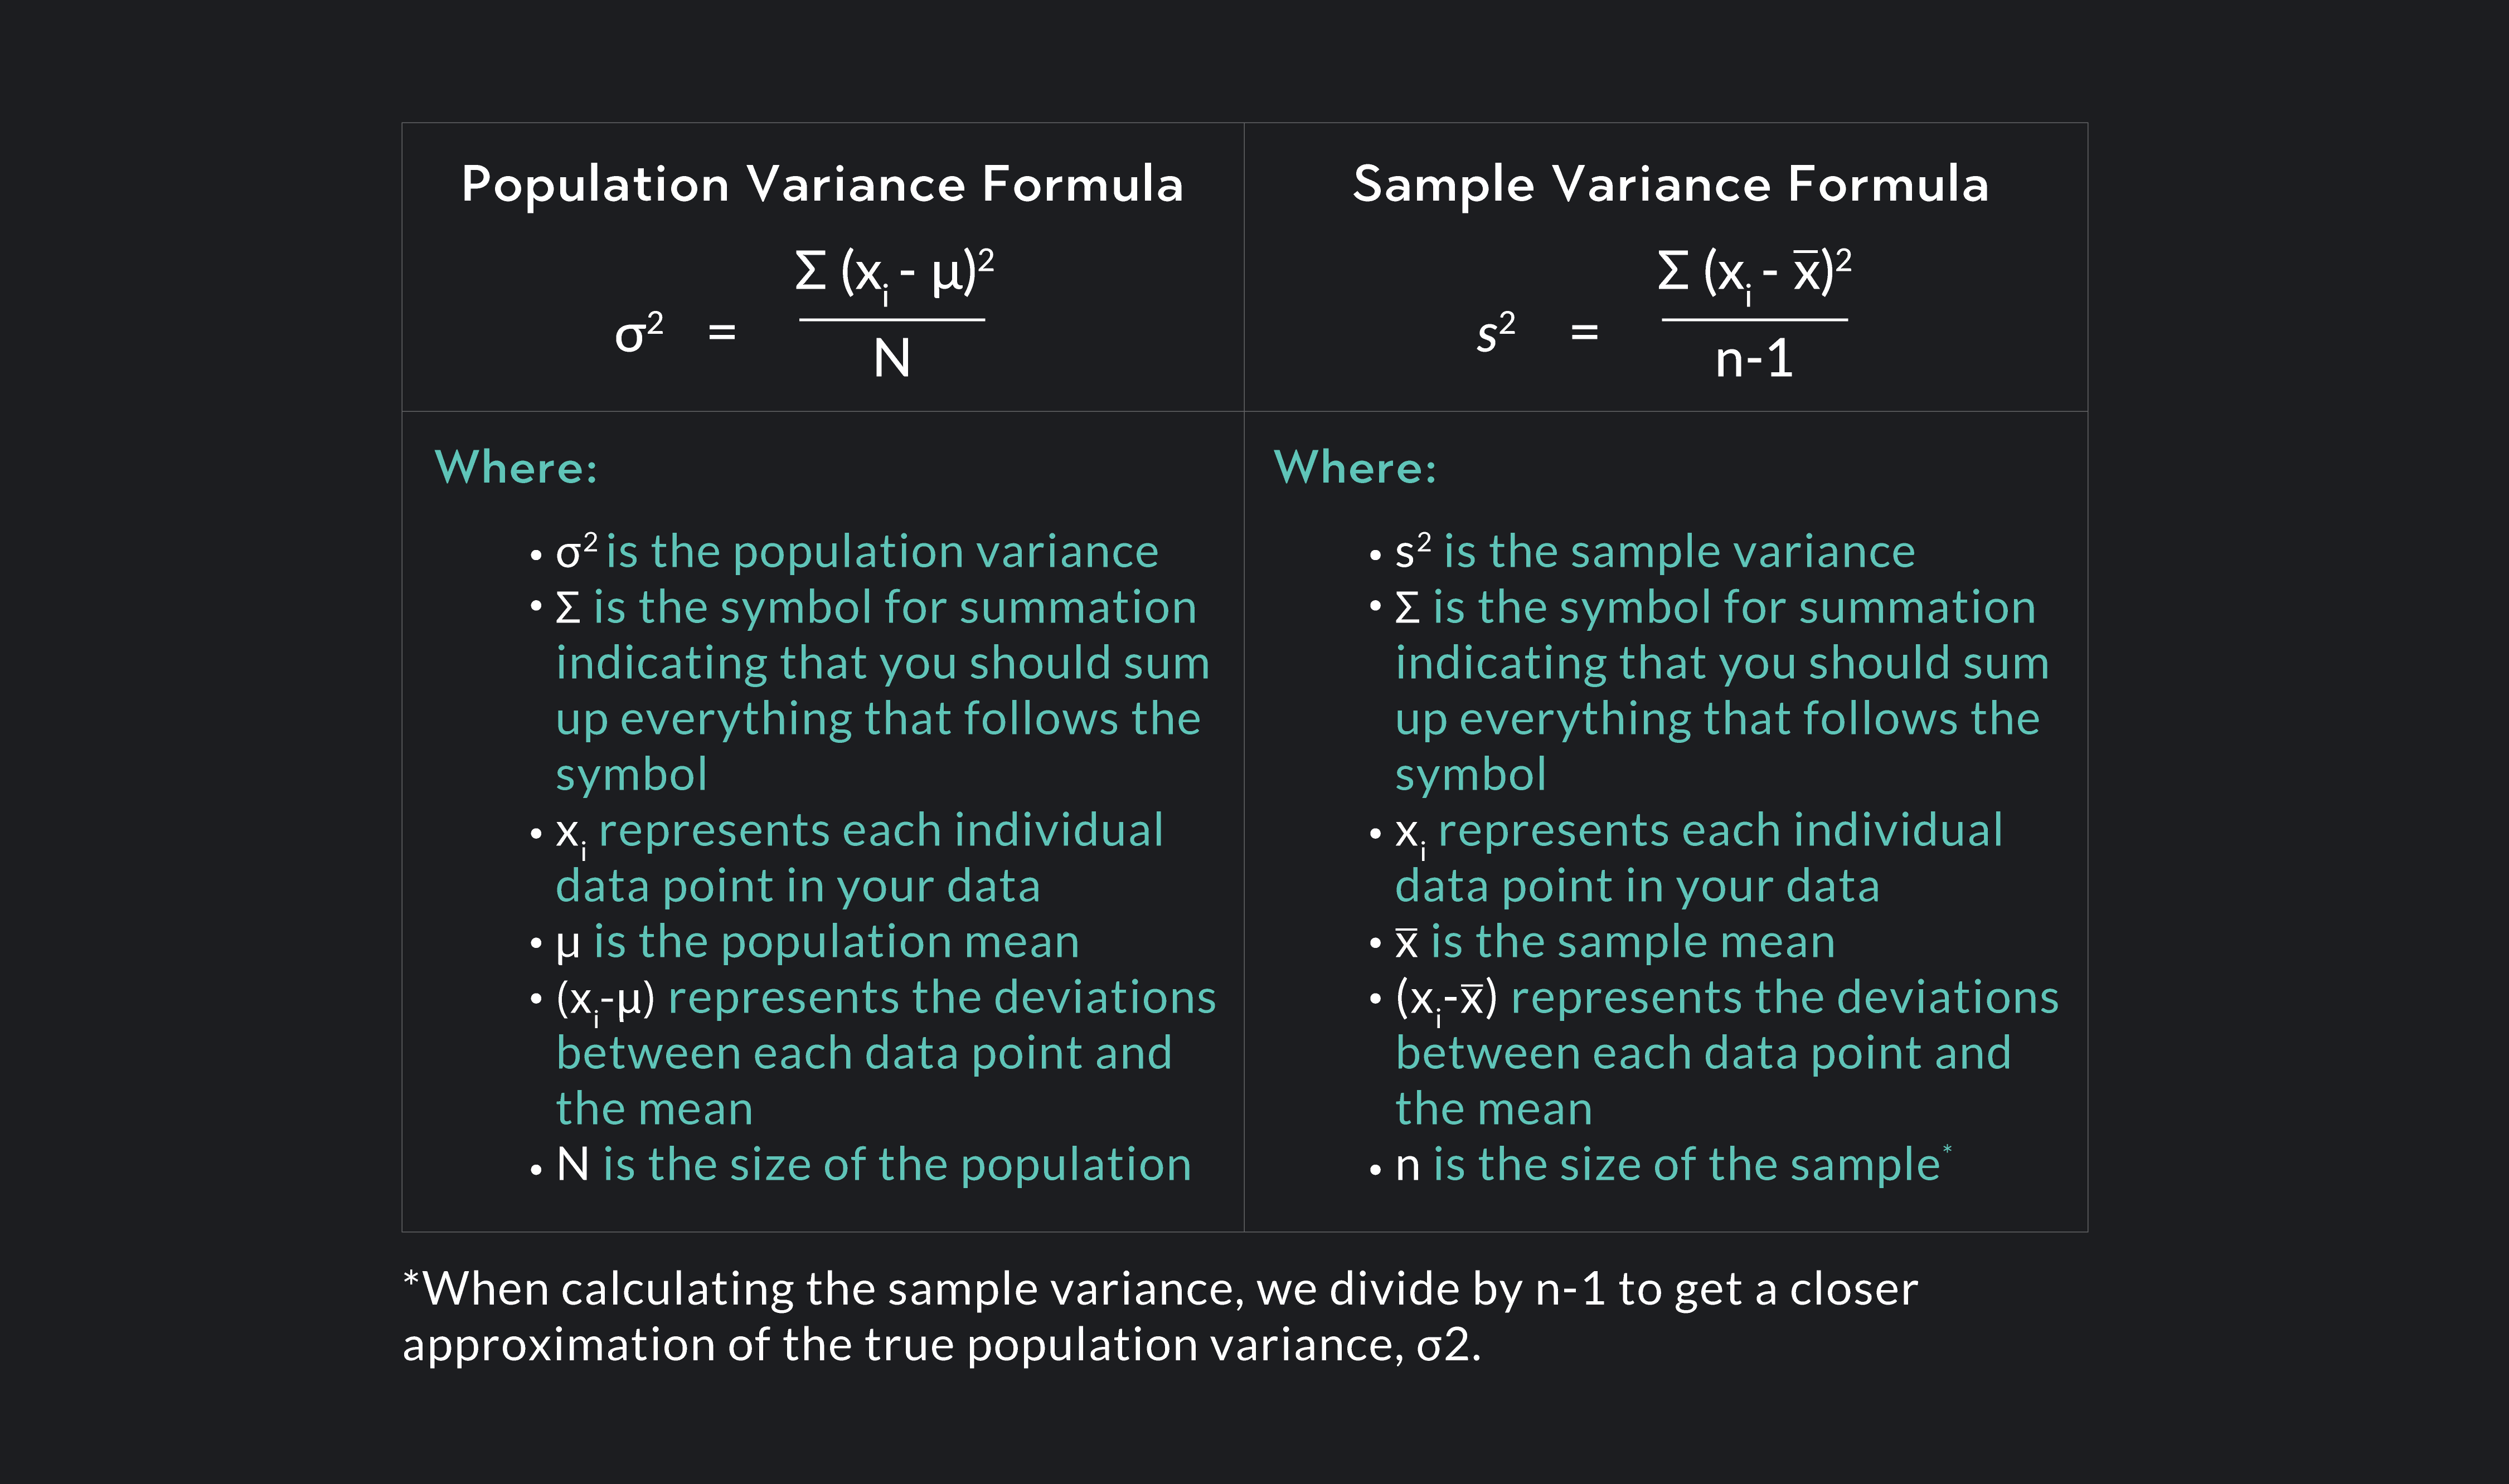 research on variance